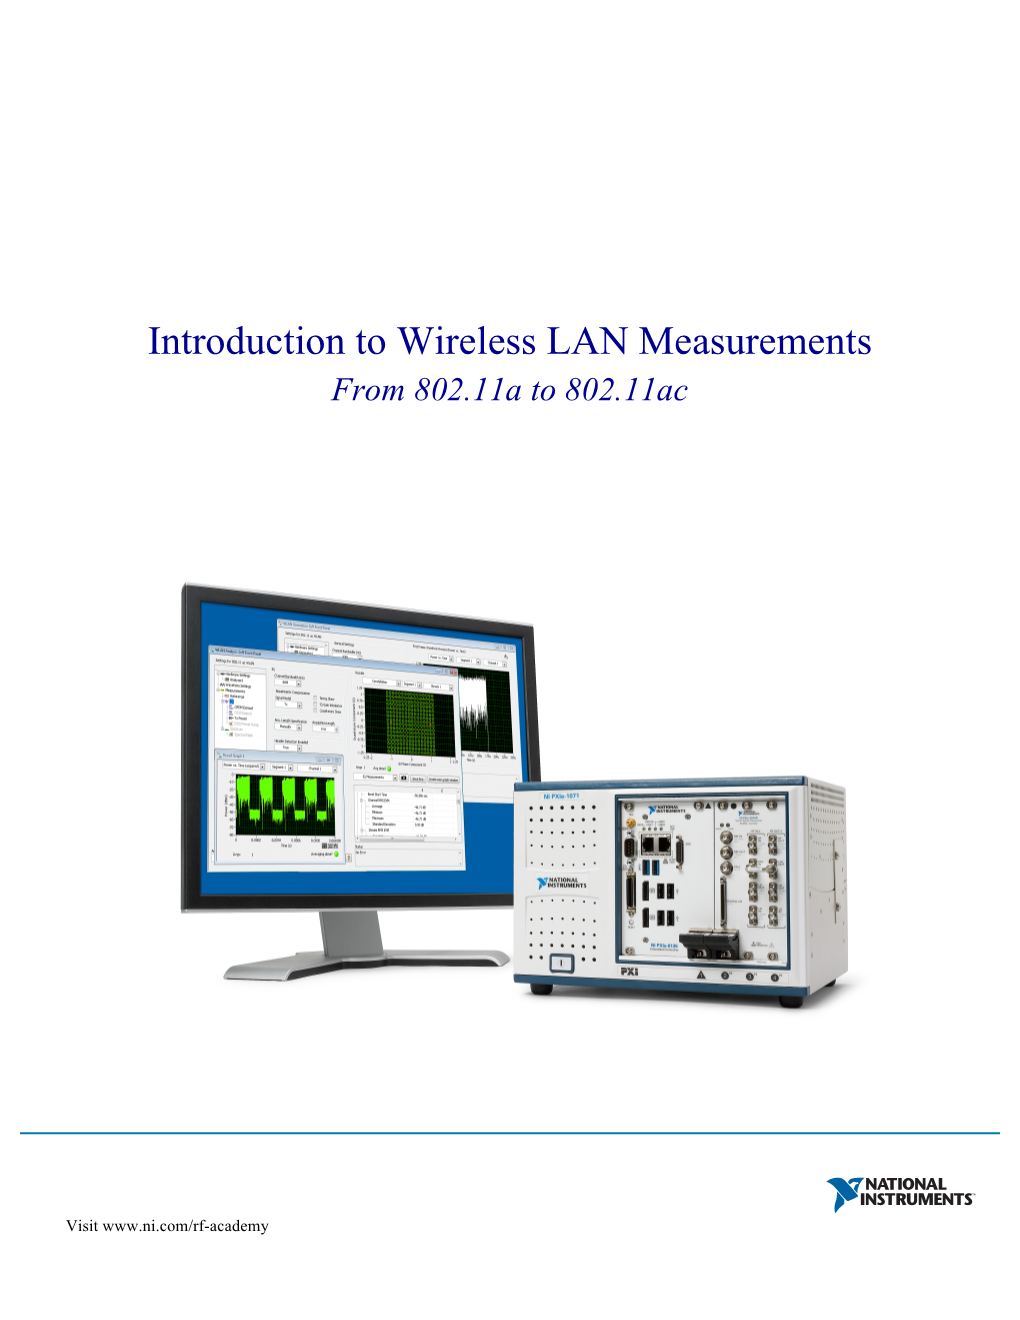 Introduction to Wireless LAN Measurements